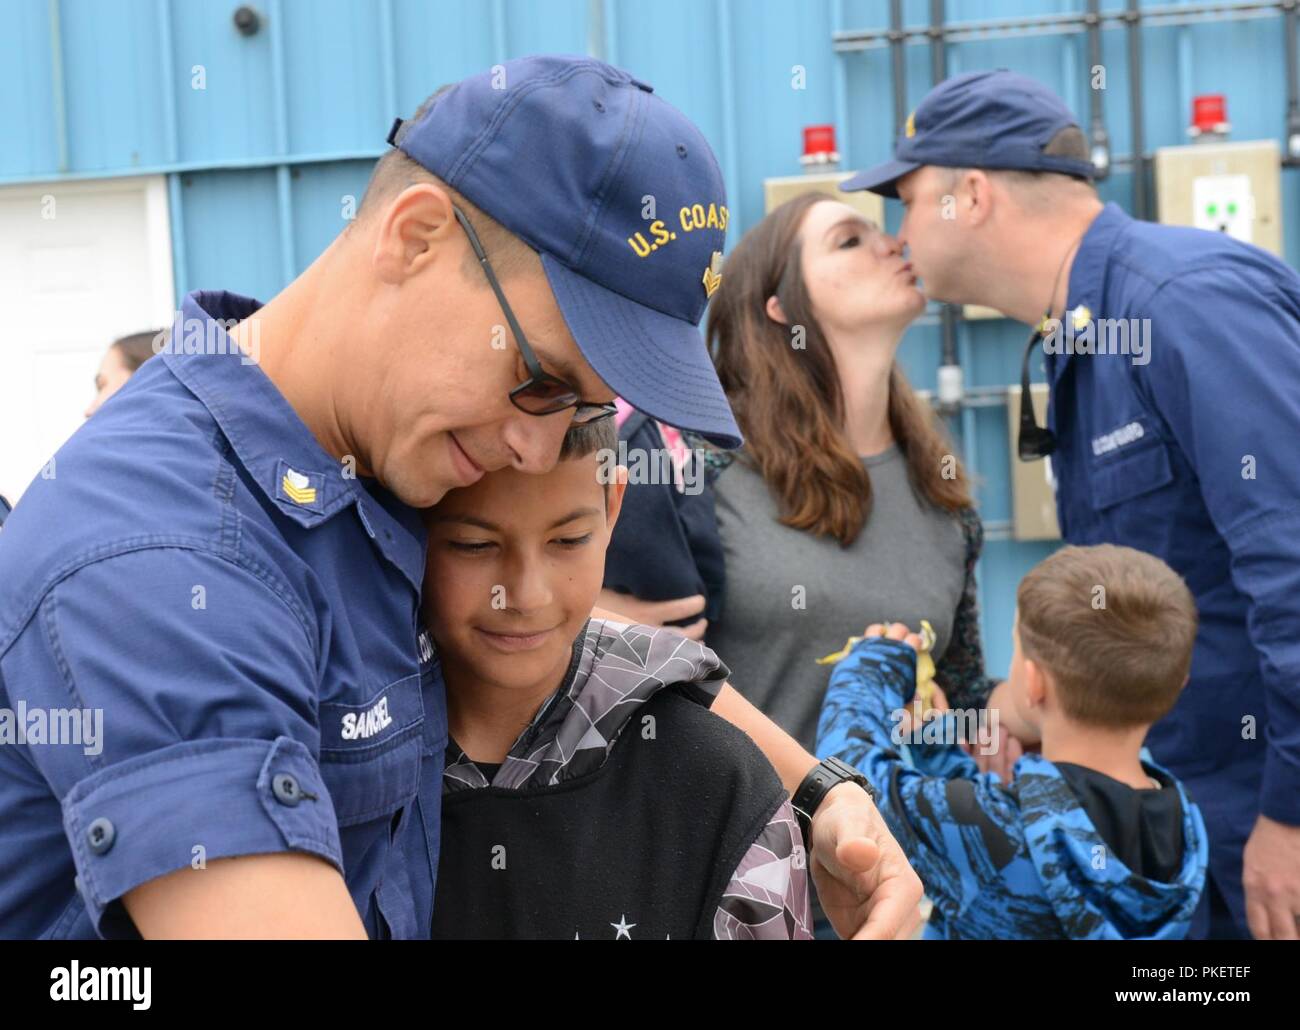 Petty Officer 1st Class Alberto Sanchez, a machinery technician aboard the Coast Guard Cutter Alex Haley (WMEC 39), hugs his son after the cutter moored at its homeport in Kodiak, Alaska, August 1, 2018. The crew members aboard the Alex Haley returned home from a 90-day deployment patrolling more than 16,000 miles throughout the Pacific Ocean. U.S. Coast Guard Stock Photo